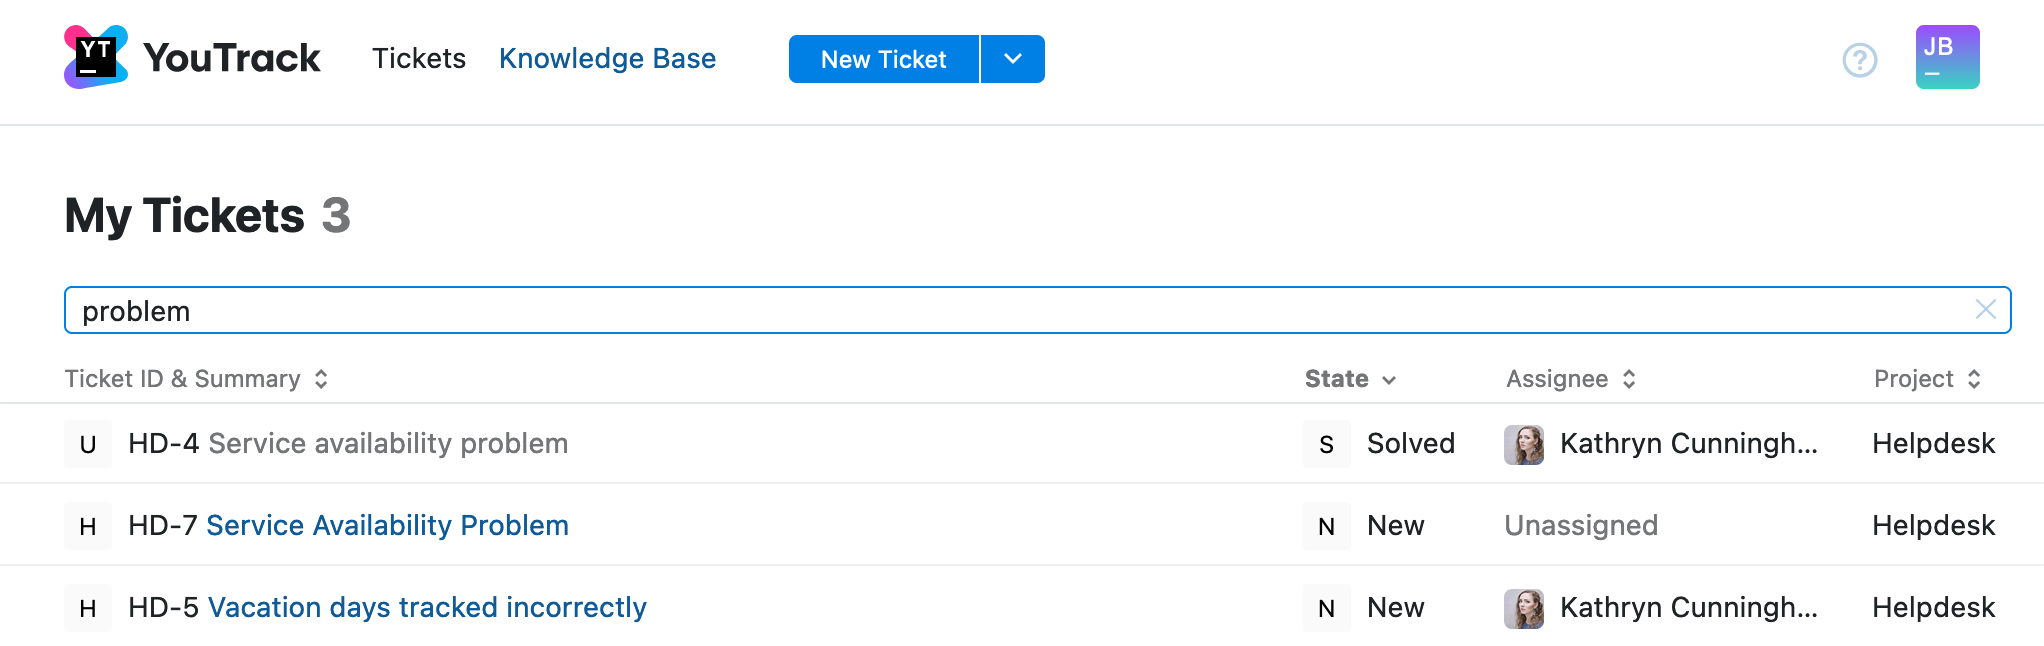 Type keywords to filter tickets